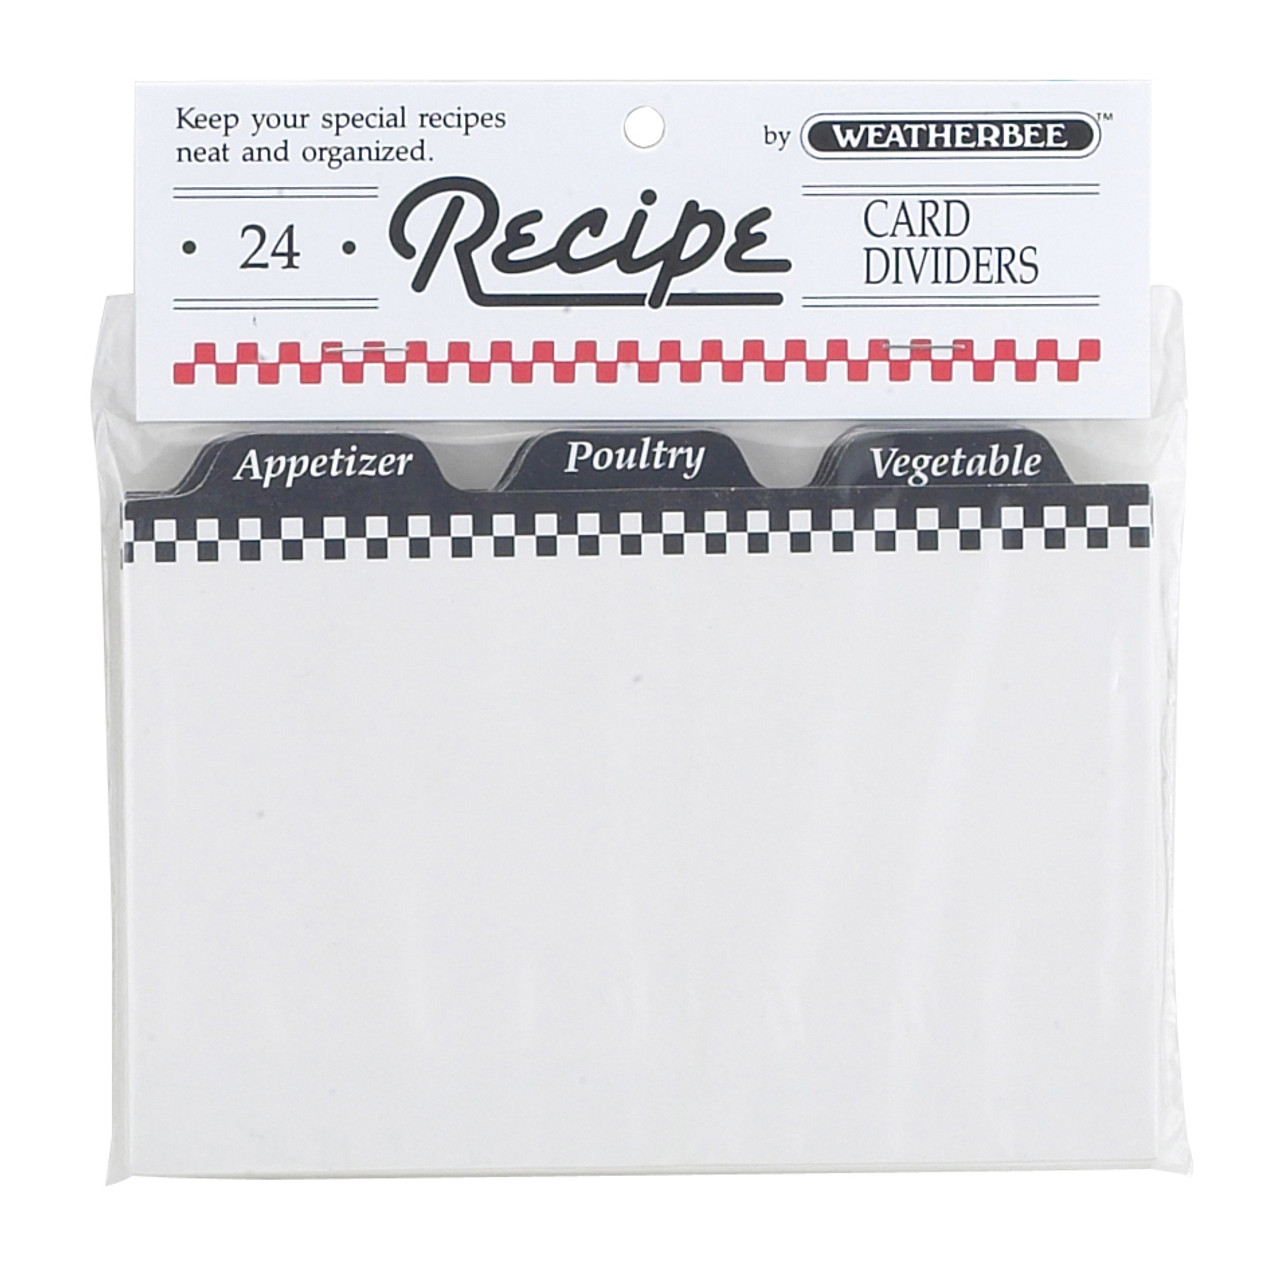 Pack of 2 Weatherbee 4 x 6 inch Recipe Card Dividers Set of 24 